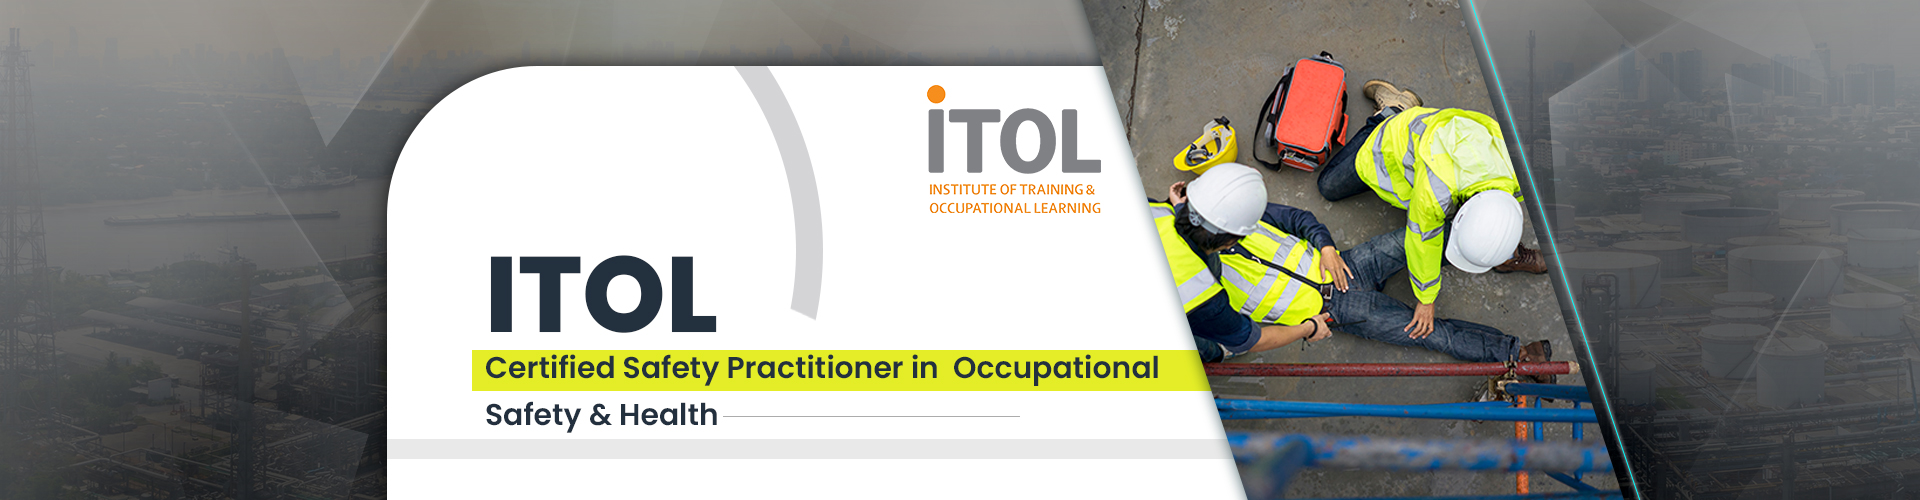 certified-safety-practitioner-occupational